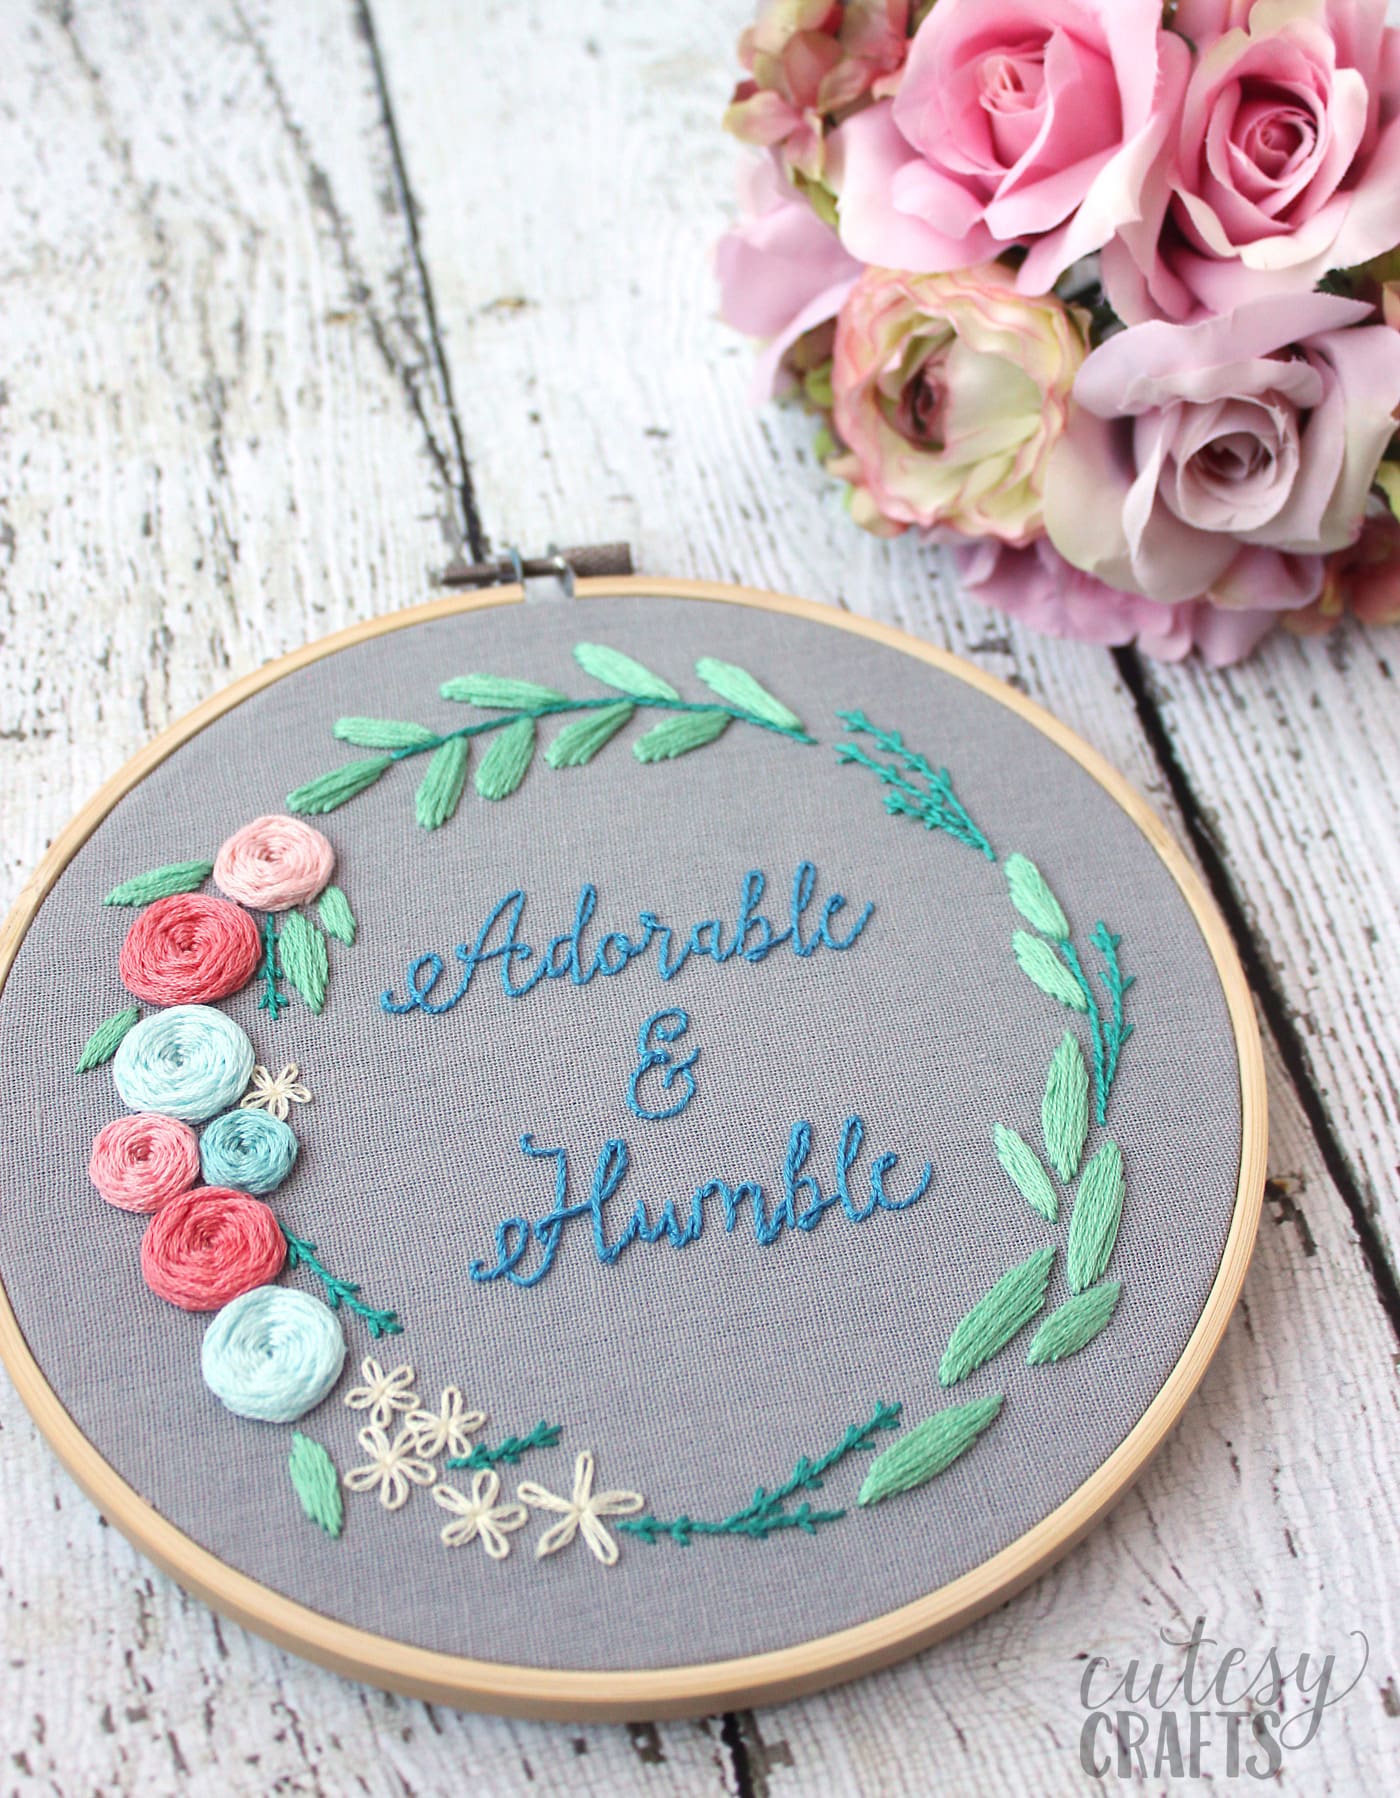 Floral wreath hand embroidery